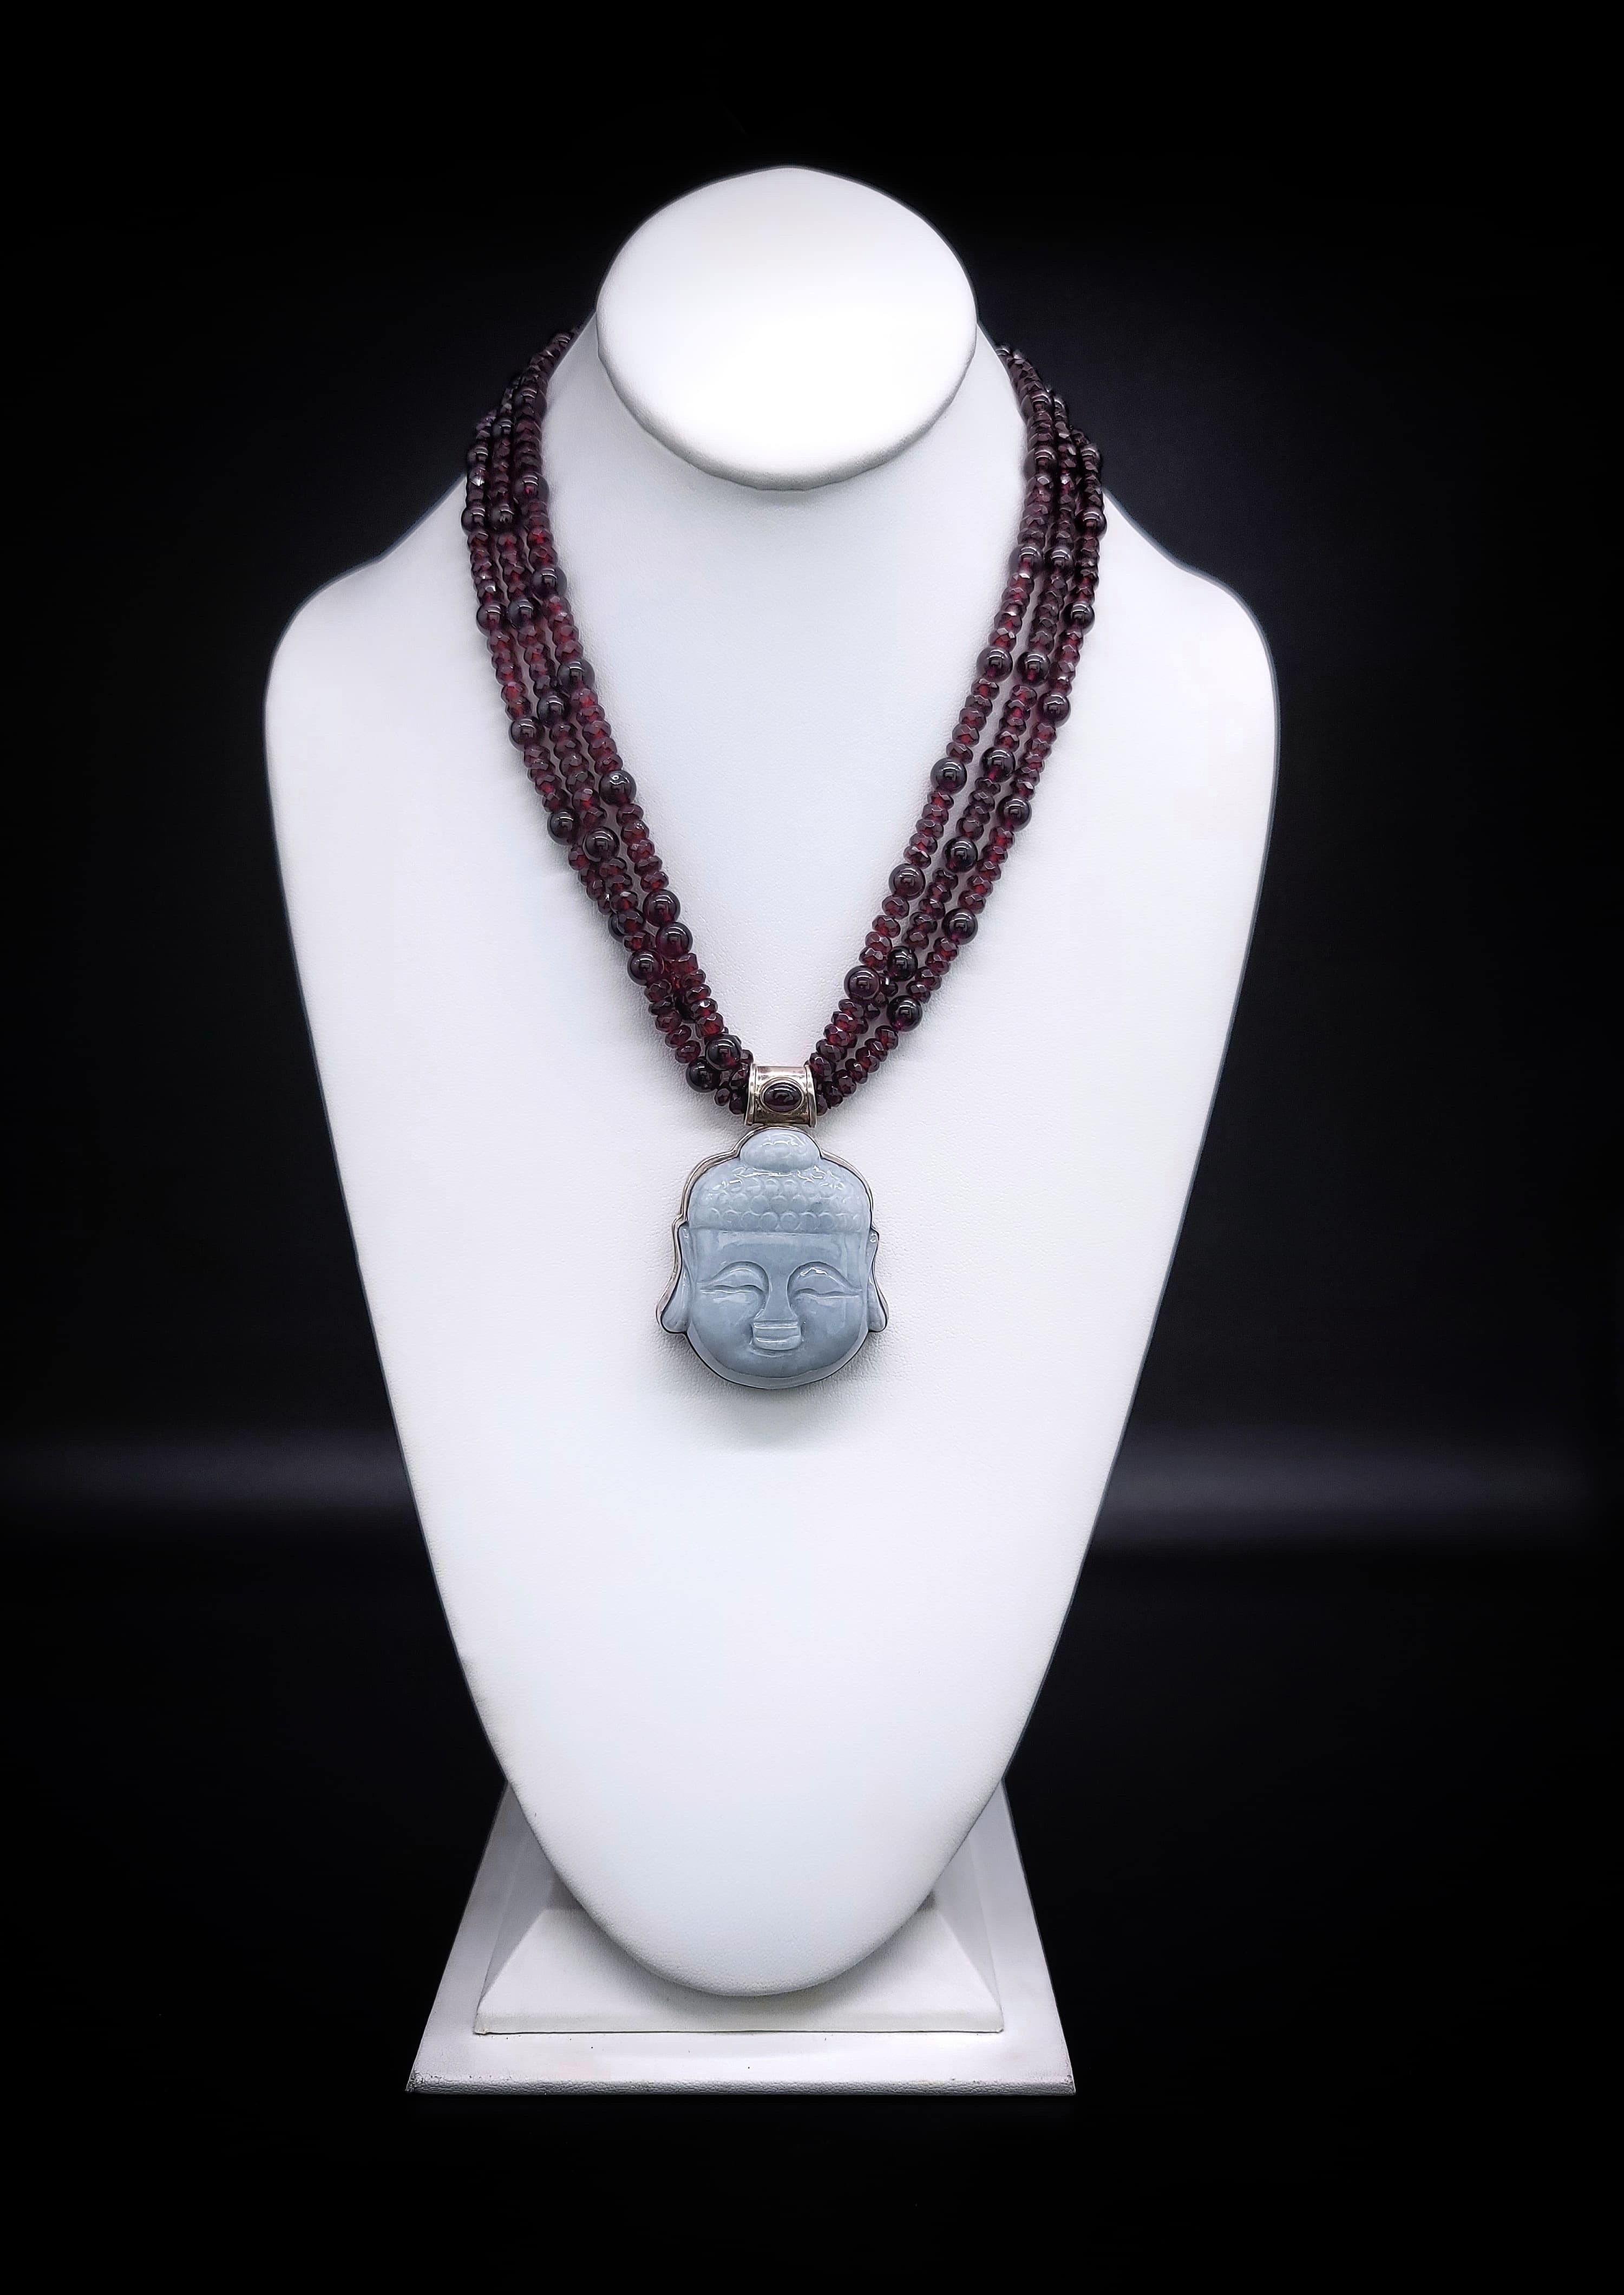 Radiant Rarity

Prepare to be captivated by a true work of art – a one-of-a-kind masterpiece that encapsulates the essence of opulence and spirituality. This exquisite necklace features three strands of lustrous hand-knotted Garnet gemstone beads,